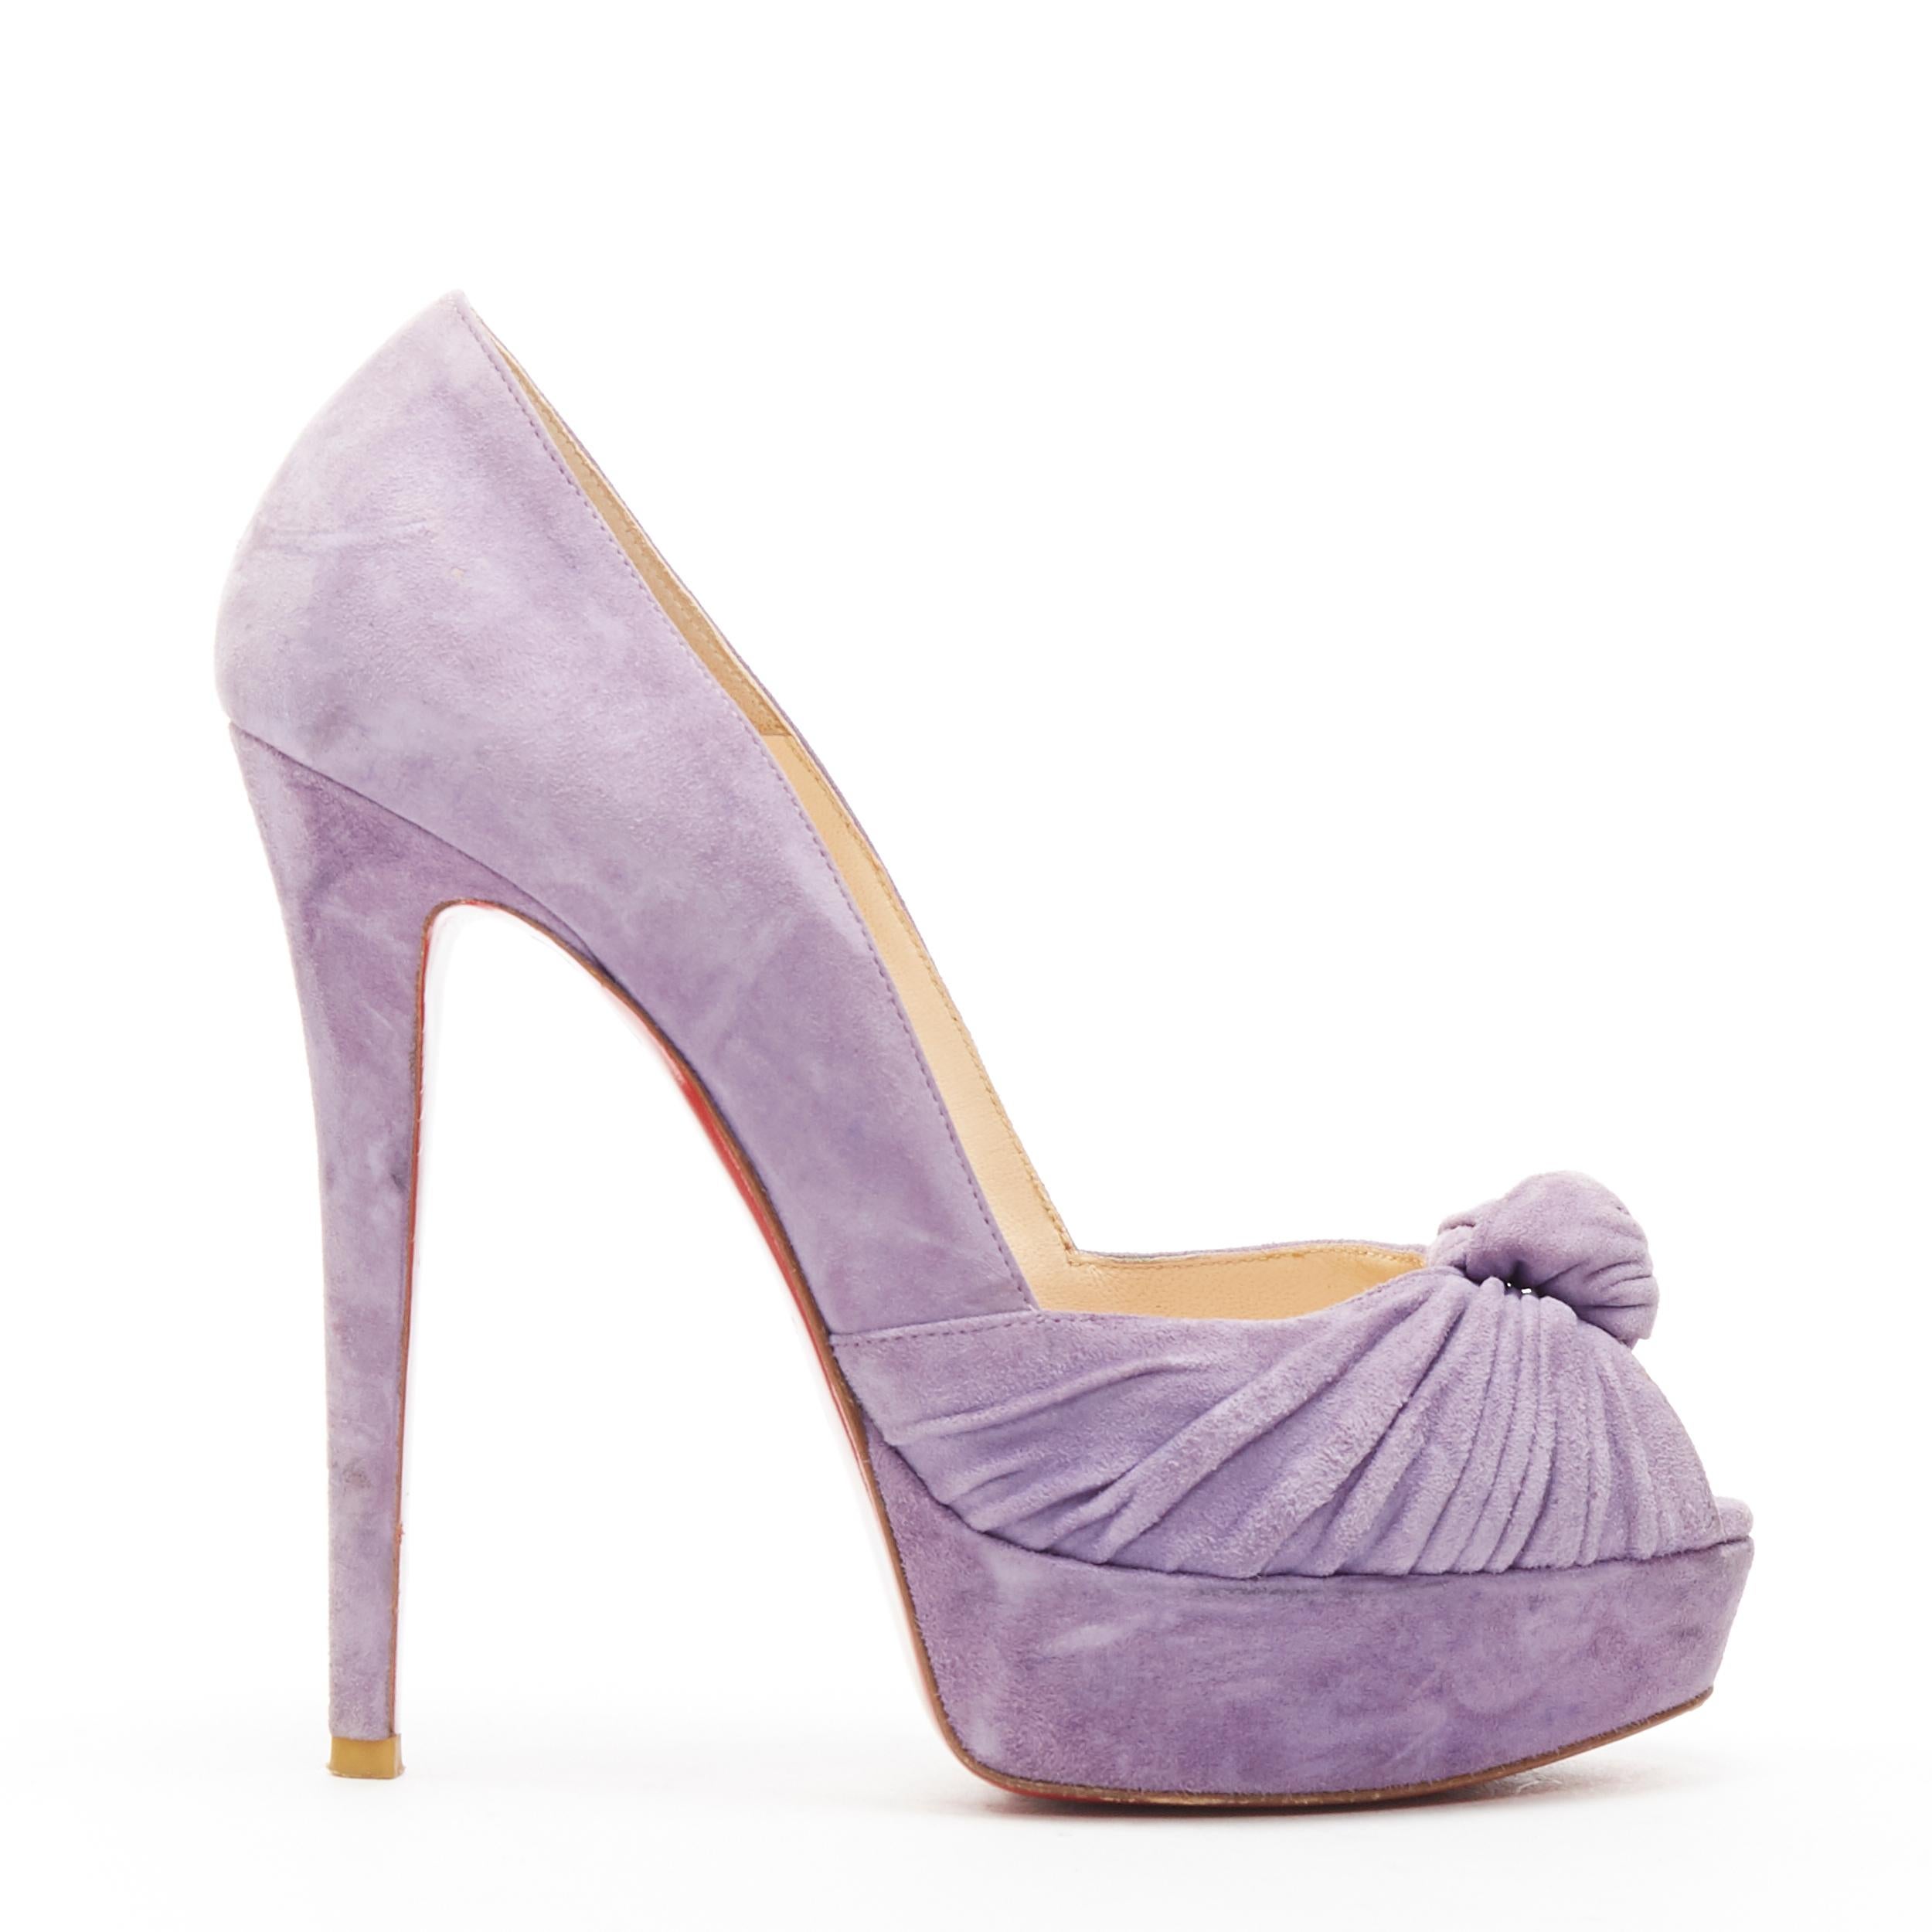 CHRISTIAN LOUBOUTIN lilac purple suede knot front peep toe platform pump EU38
Brand: Christian Louboutin
Designer: Christian Louboutin
Model Name / Style: Knot platform
Material: Suede
Color: Purple
Pattern: Solid
Extra Detail: Ultra High (4 in &